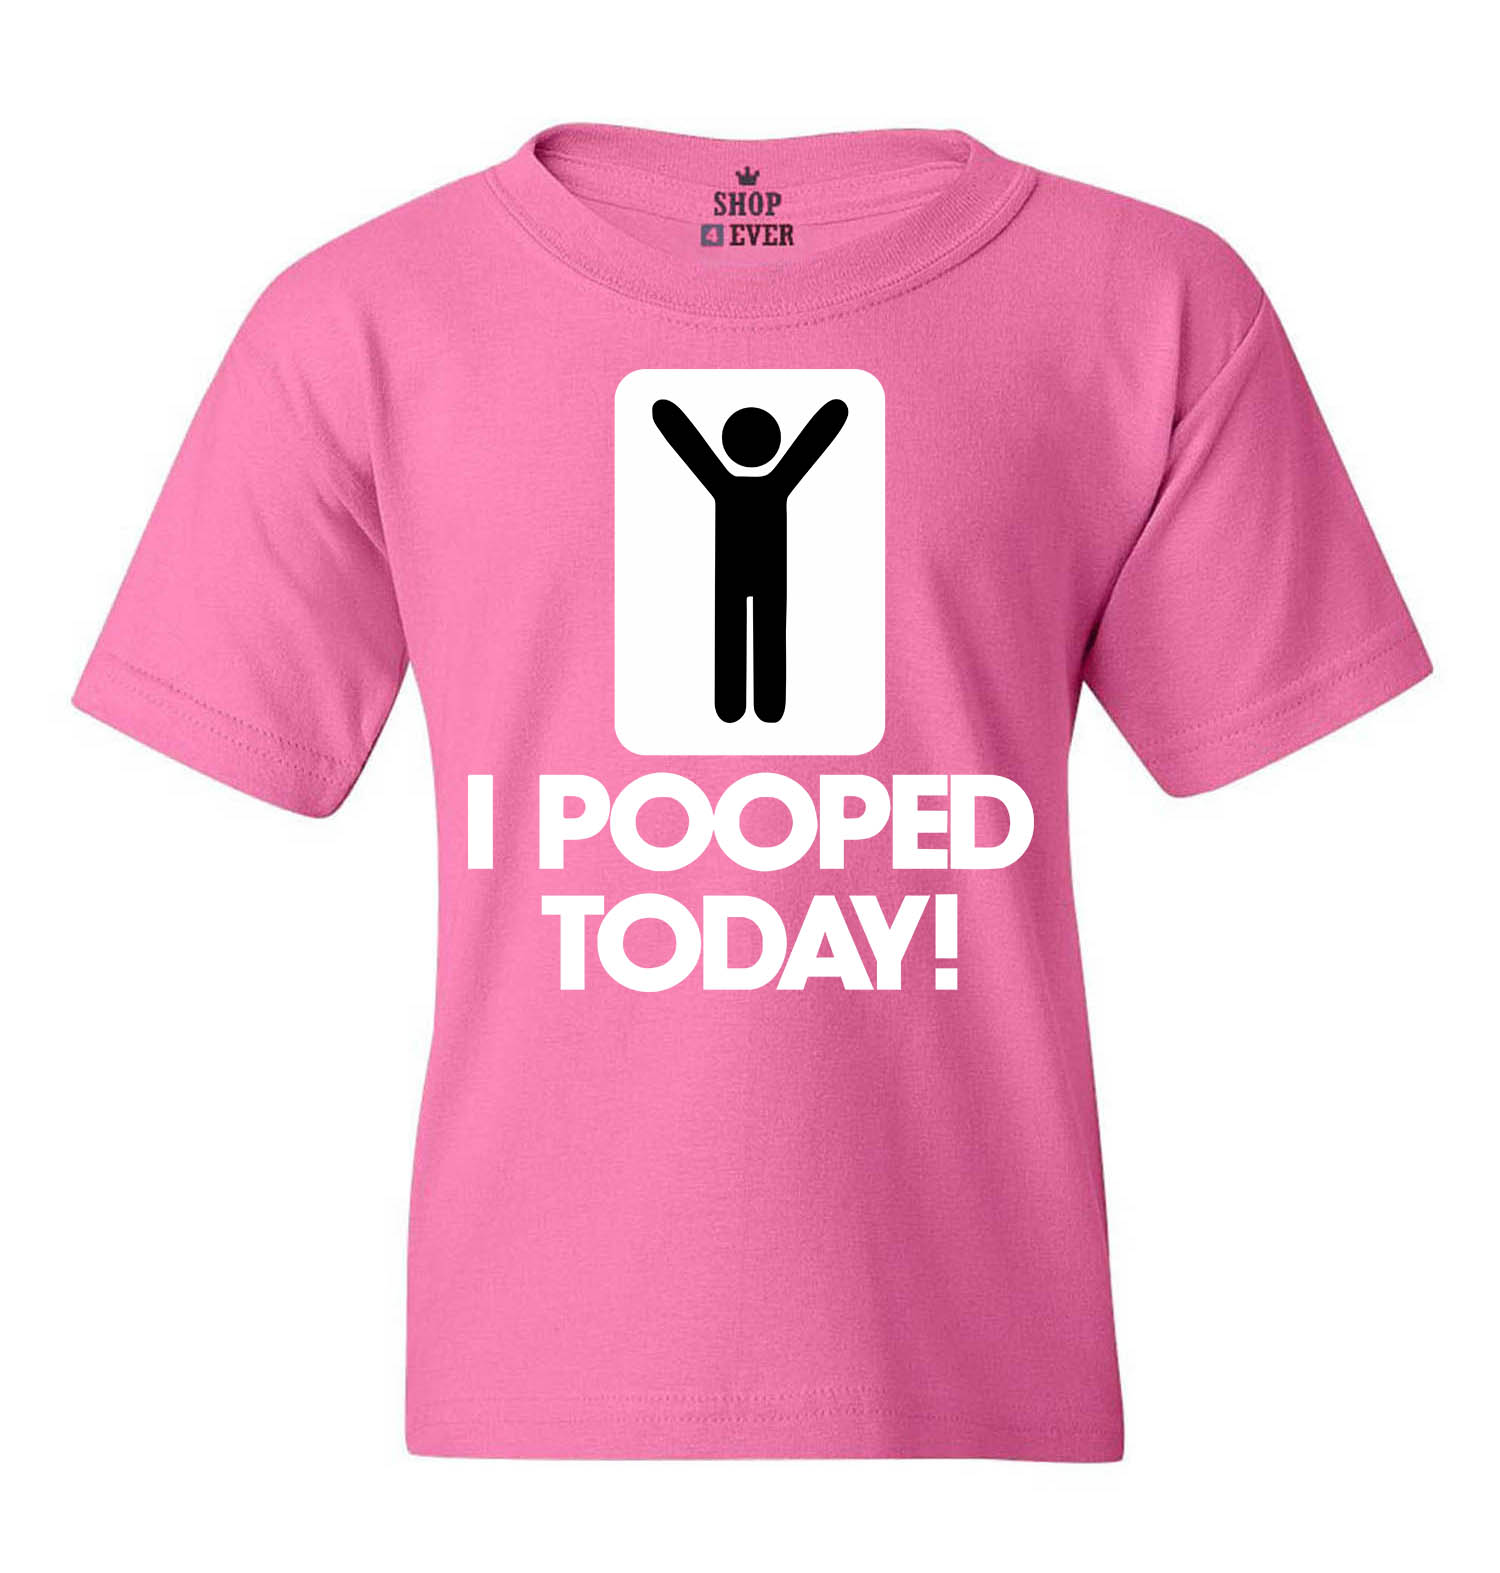 Shop4Ever Kids I Pooped Today Funny Poop Graphic Child's Youth T-Shirt Medium Azalea Pink - image 1 of 4